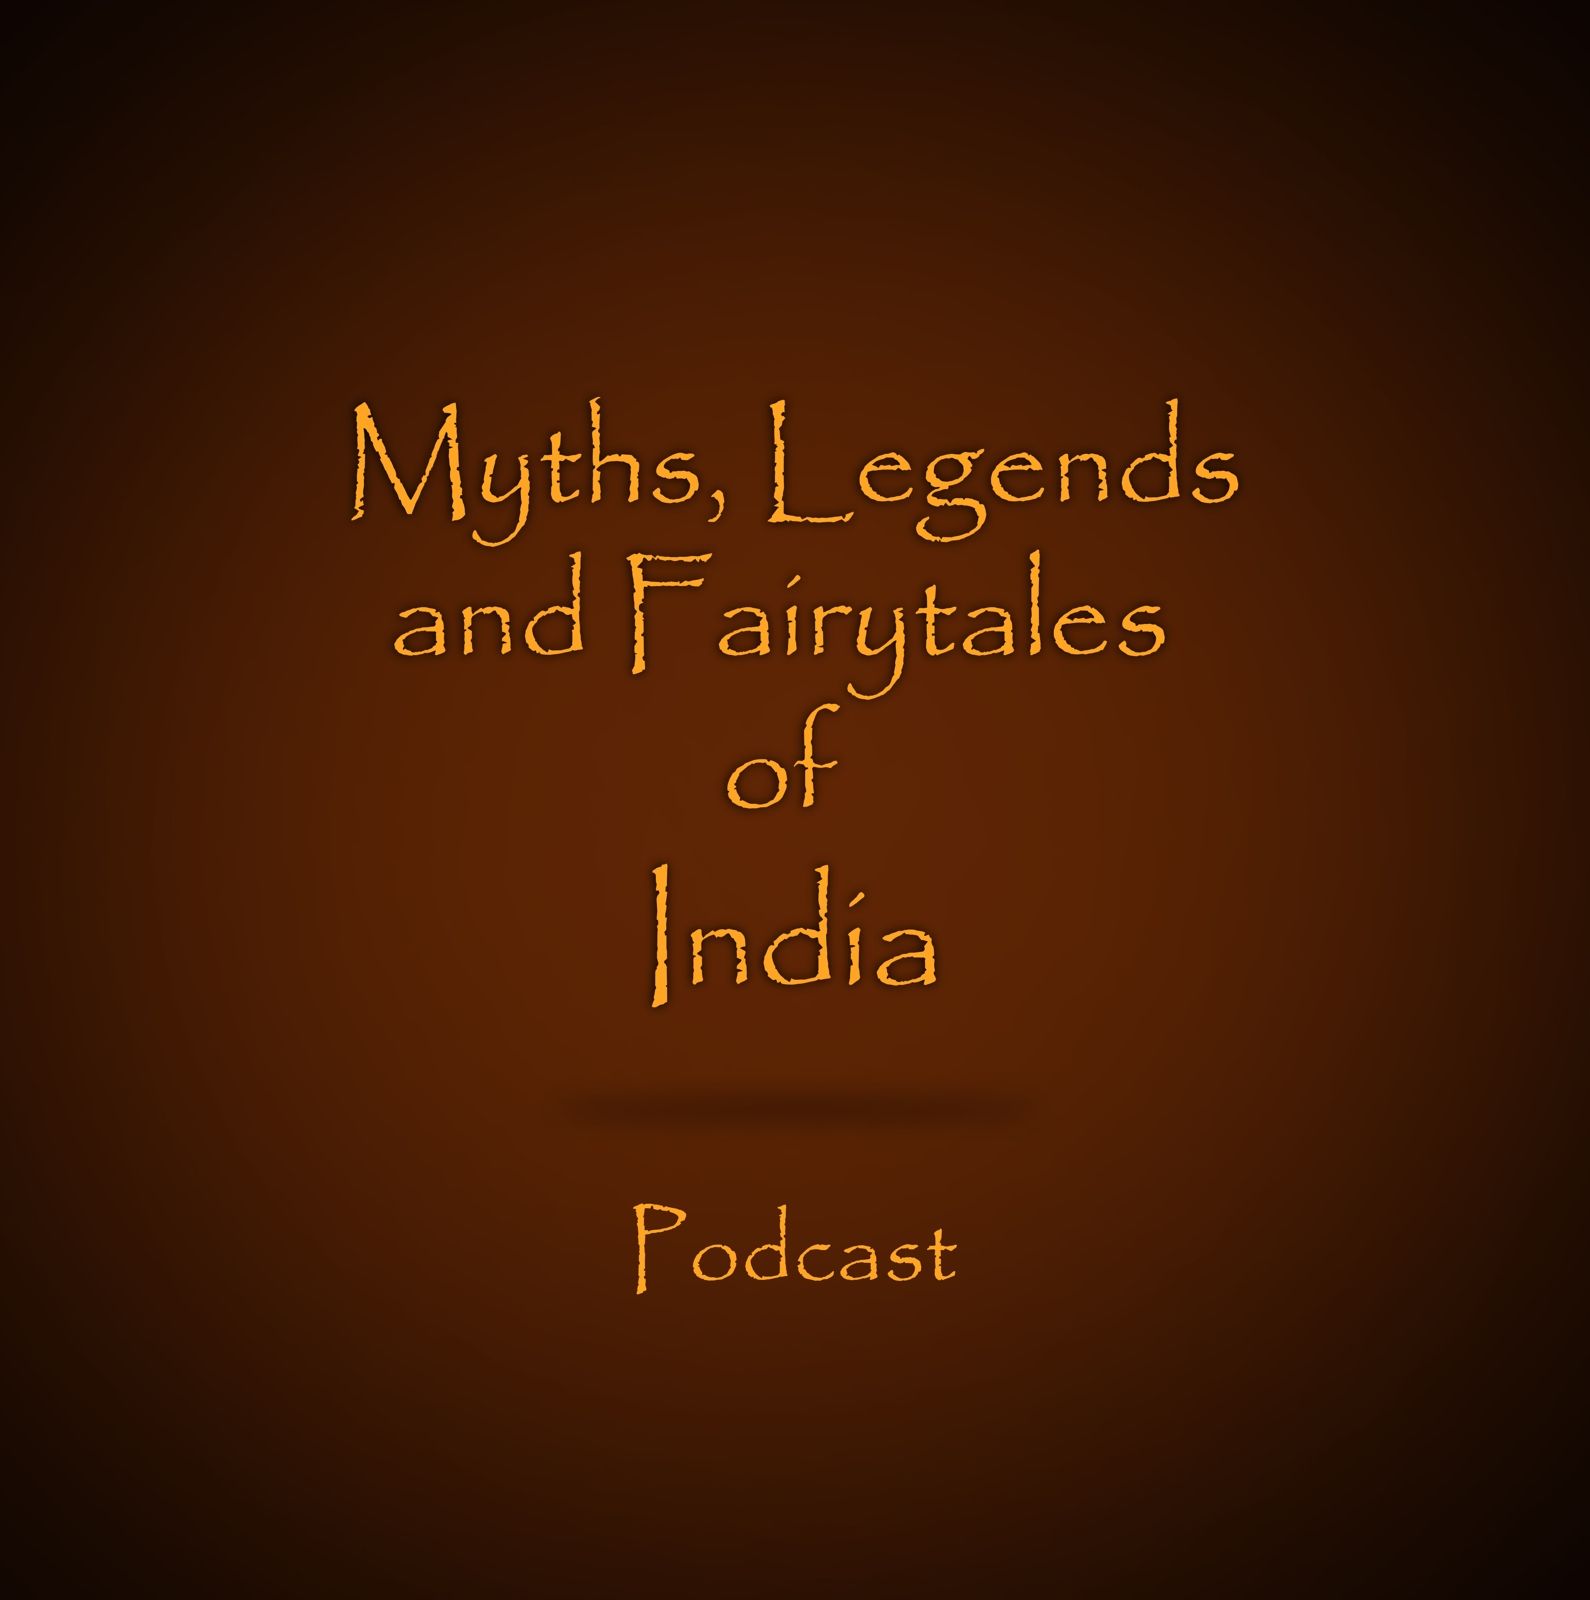 Introducing the Myths, Legends and Fairytales of India Podcast